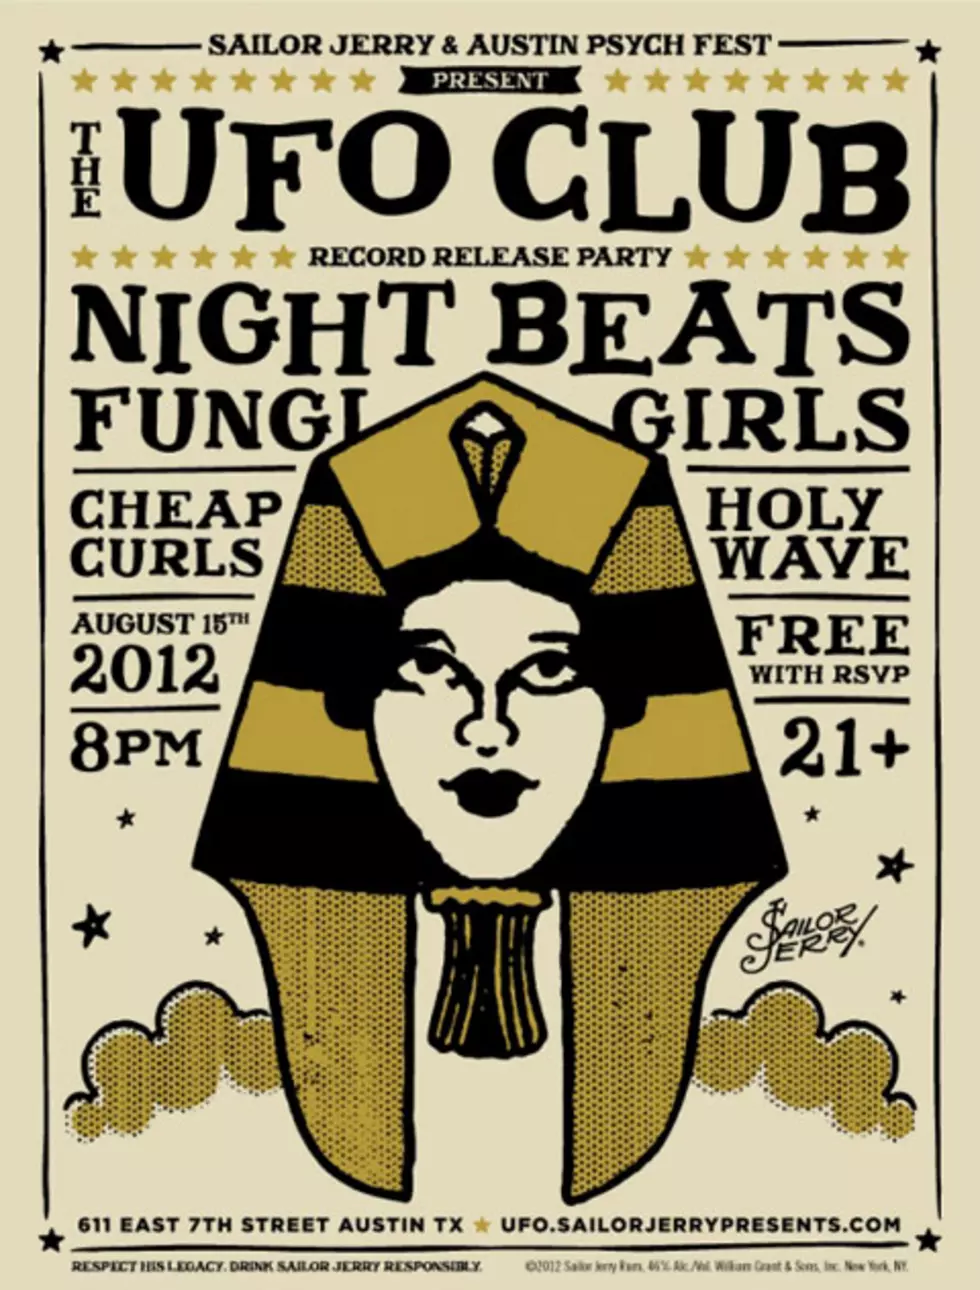 Sailor Jerry &#038; Austin Psych Fest present The UFO Club &#038; more @ Red 7 (free with RSVP)